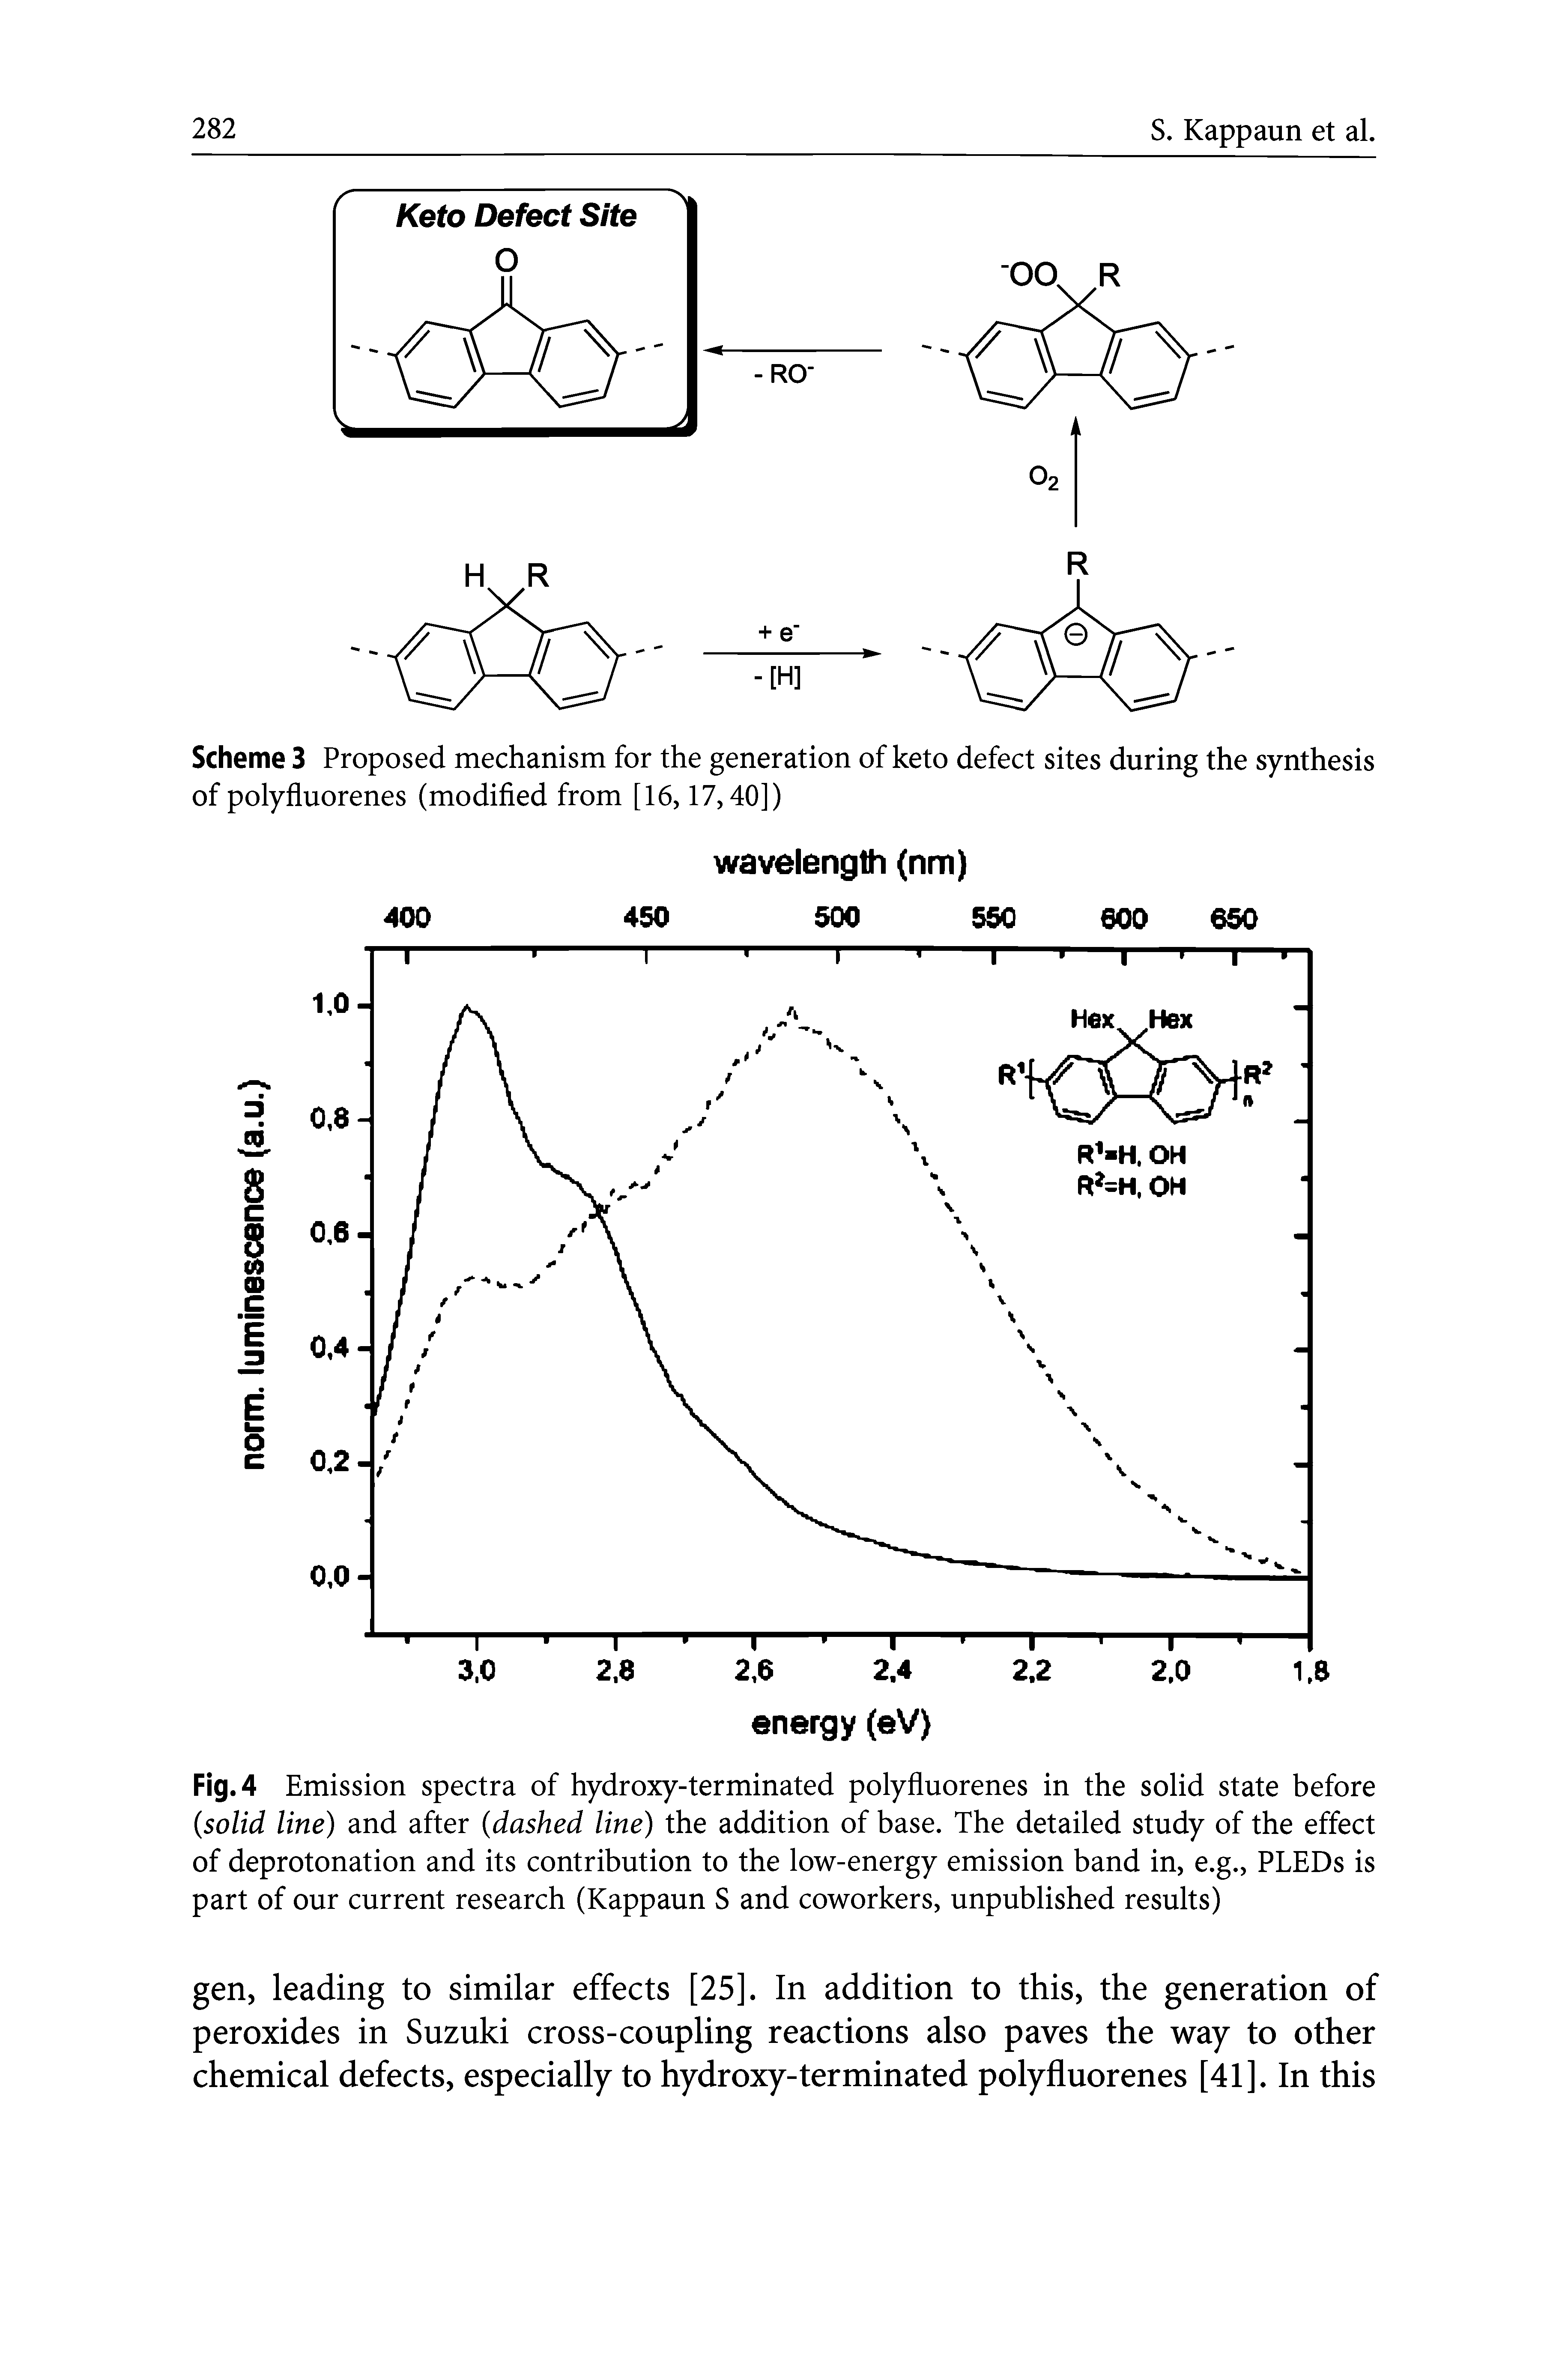 Scheme 3 Proposed mechanism for the generation of keto defect sites during the synthesis of polyfluorenes (modified from [16,17,40])...